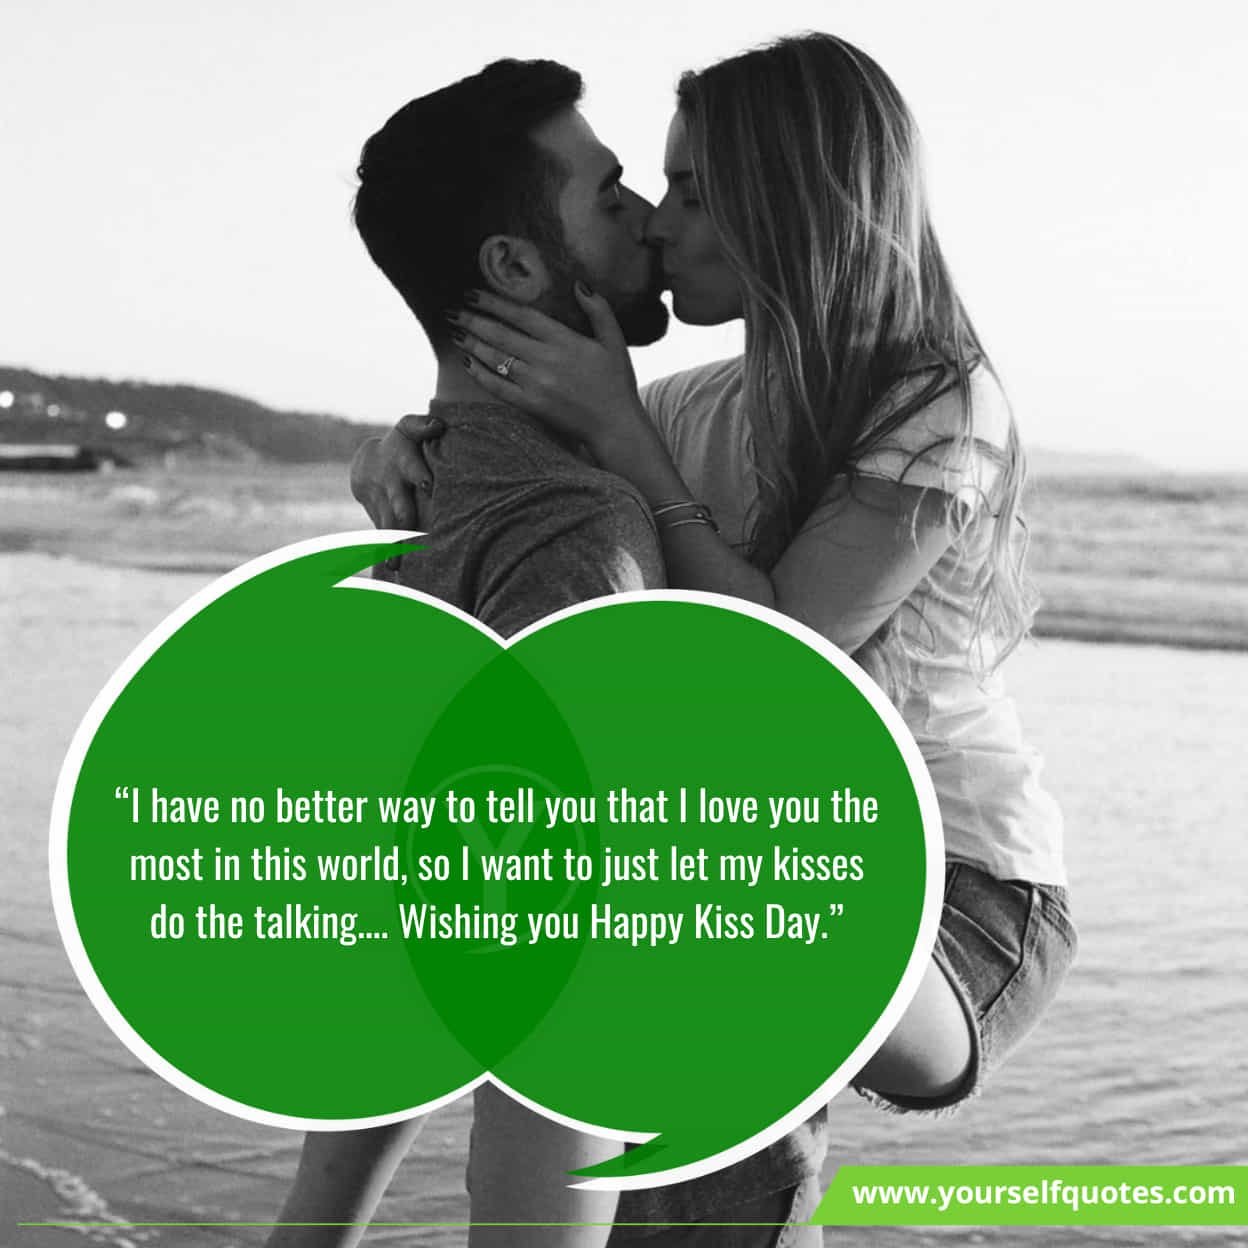 International Kissing Day Messages & Slogans